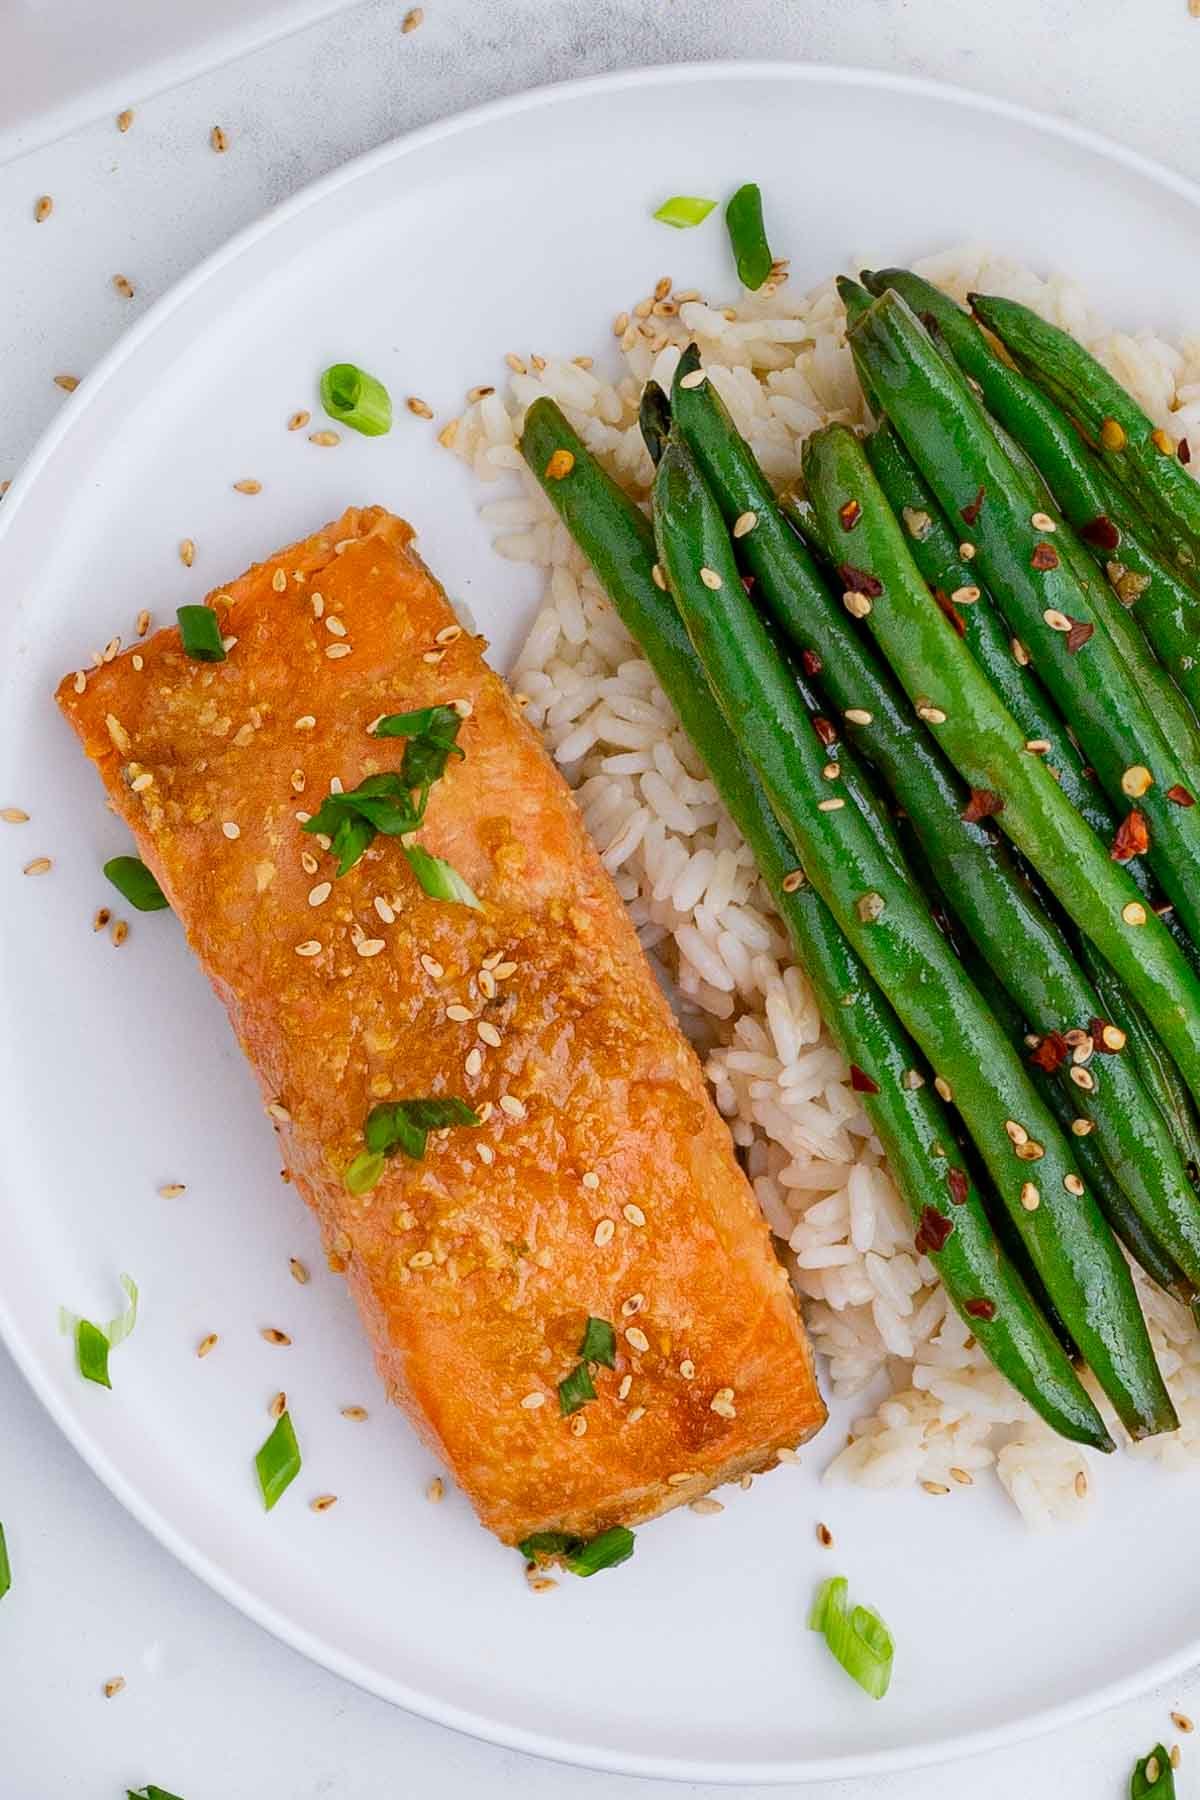 Salmon, green beans, and brown rice is a healthy meal.